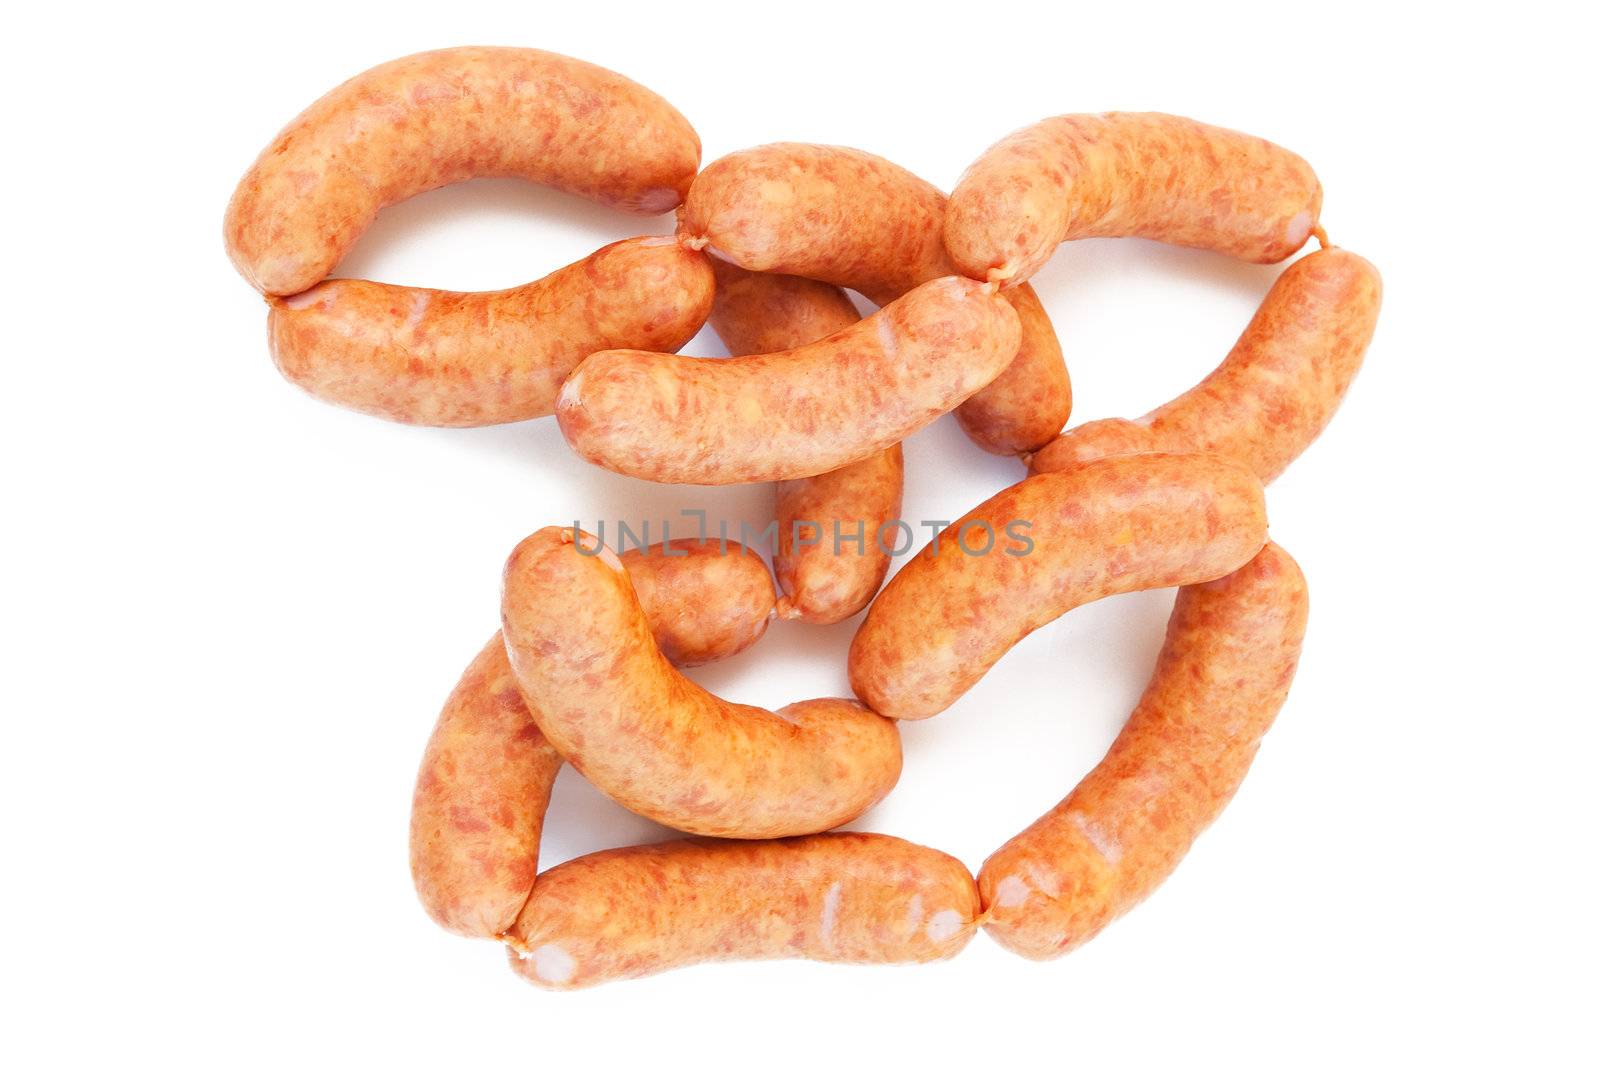 Sausages on the white background